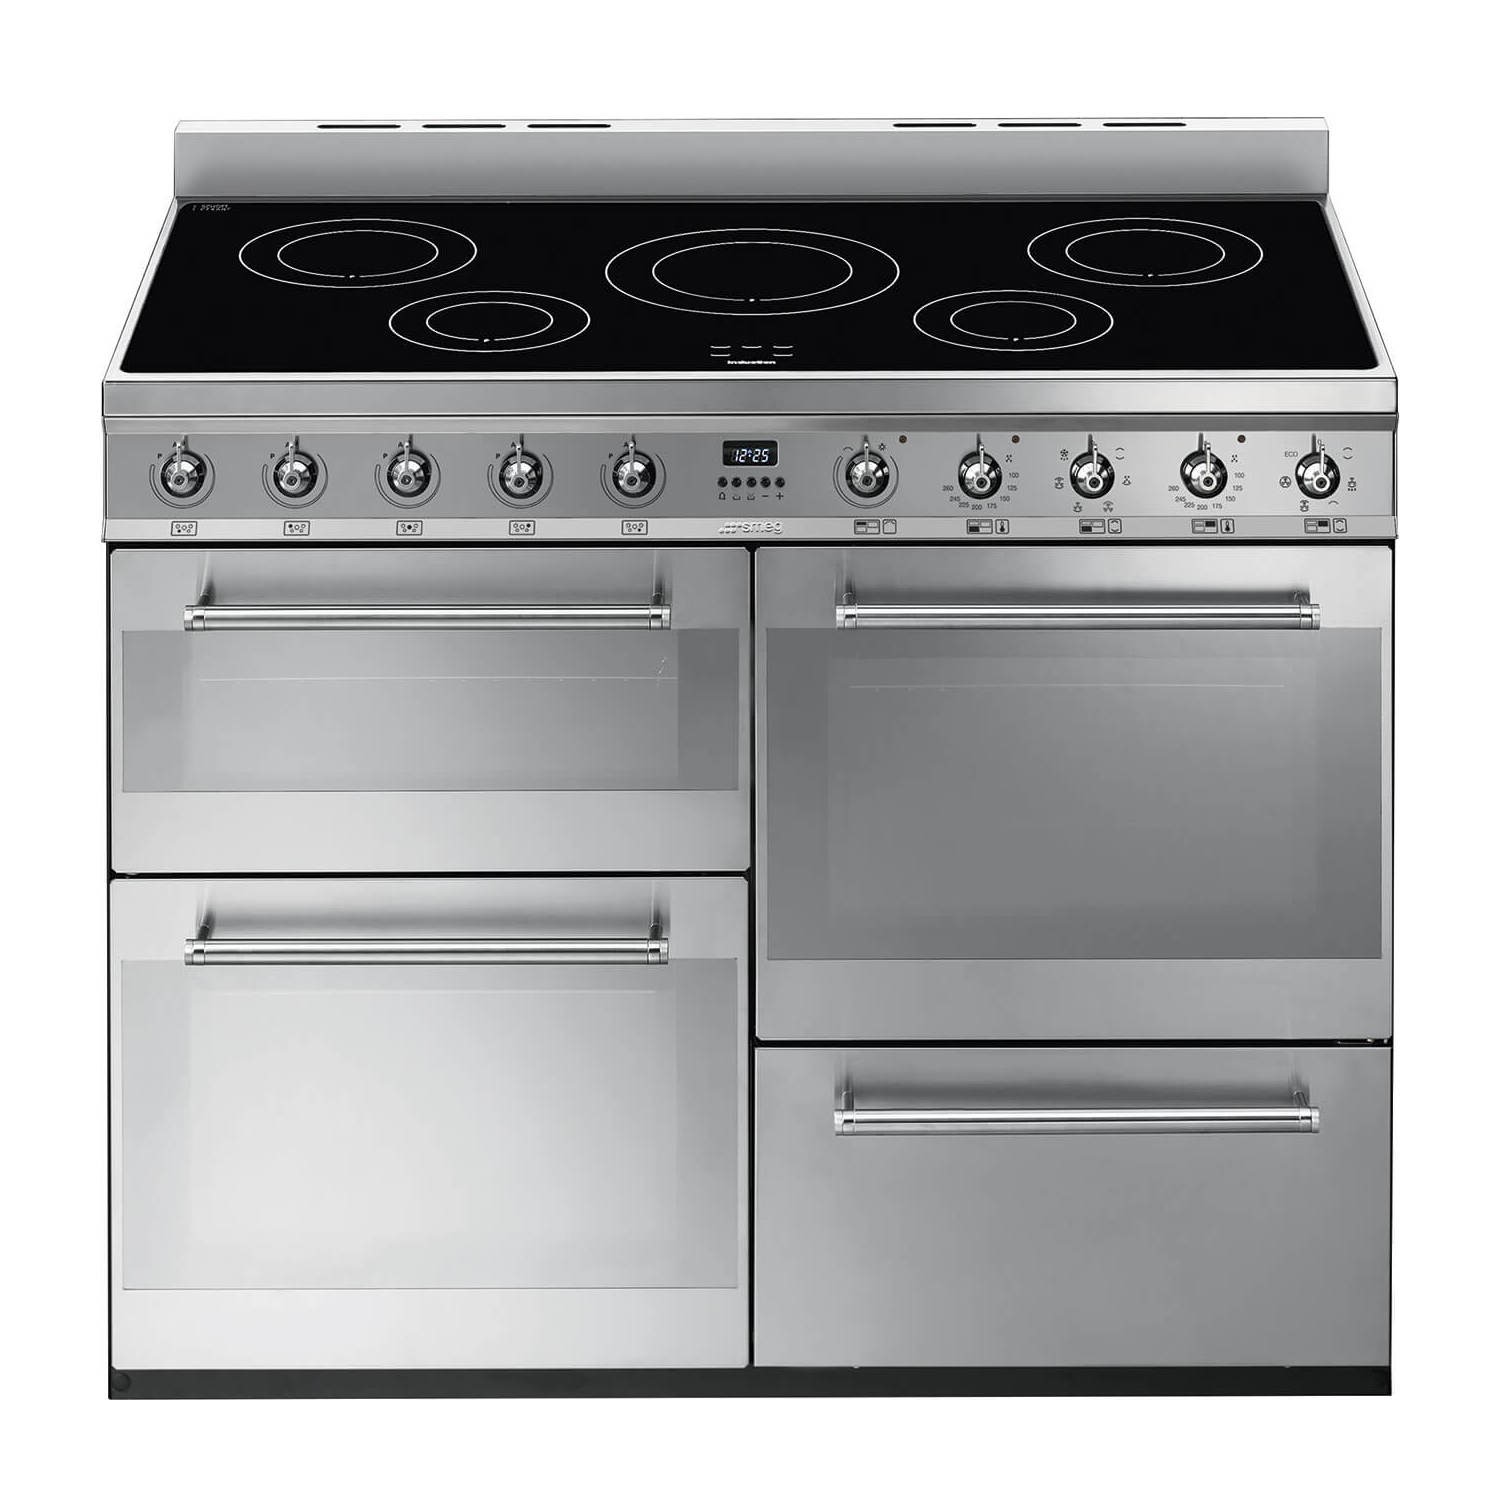 Smeg SYD4110I Symphony Range Cooker with Induction Hob, Stainless Steel